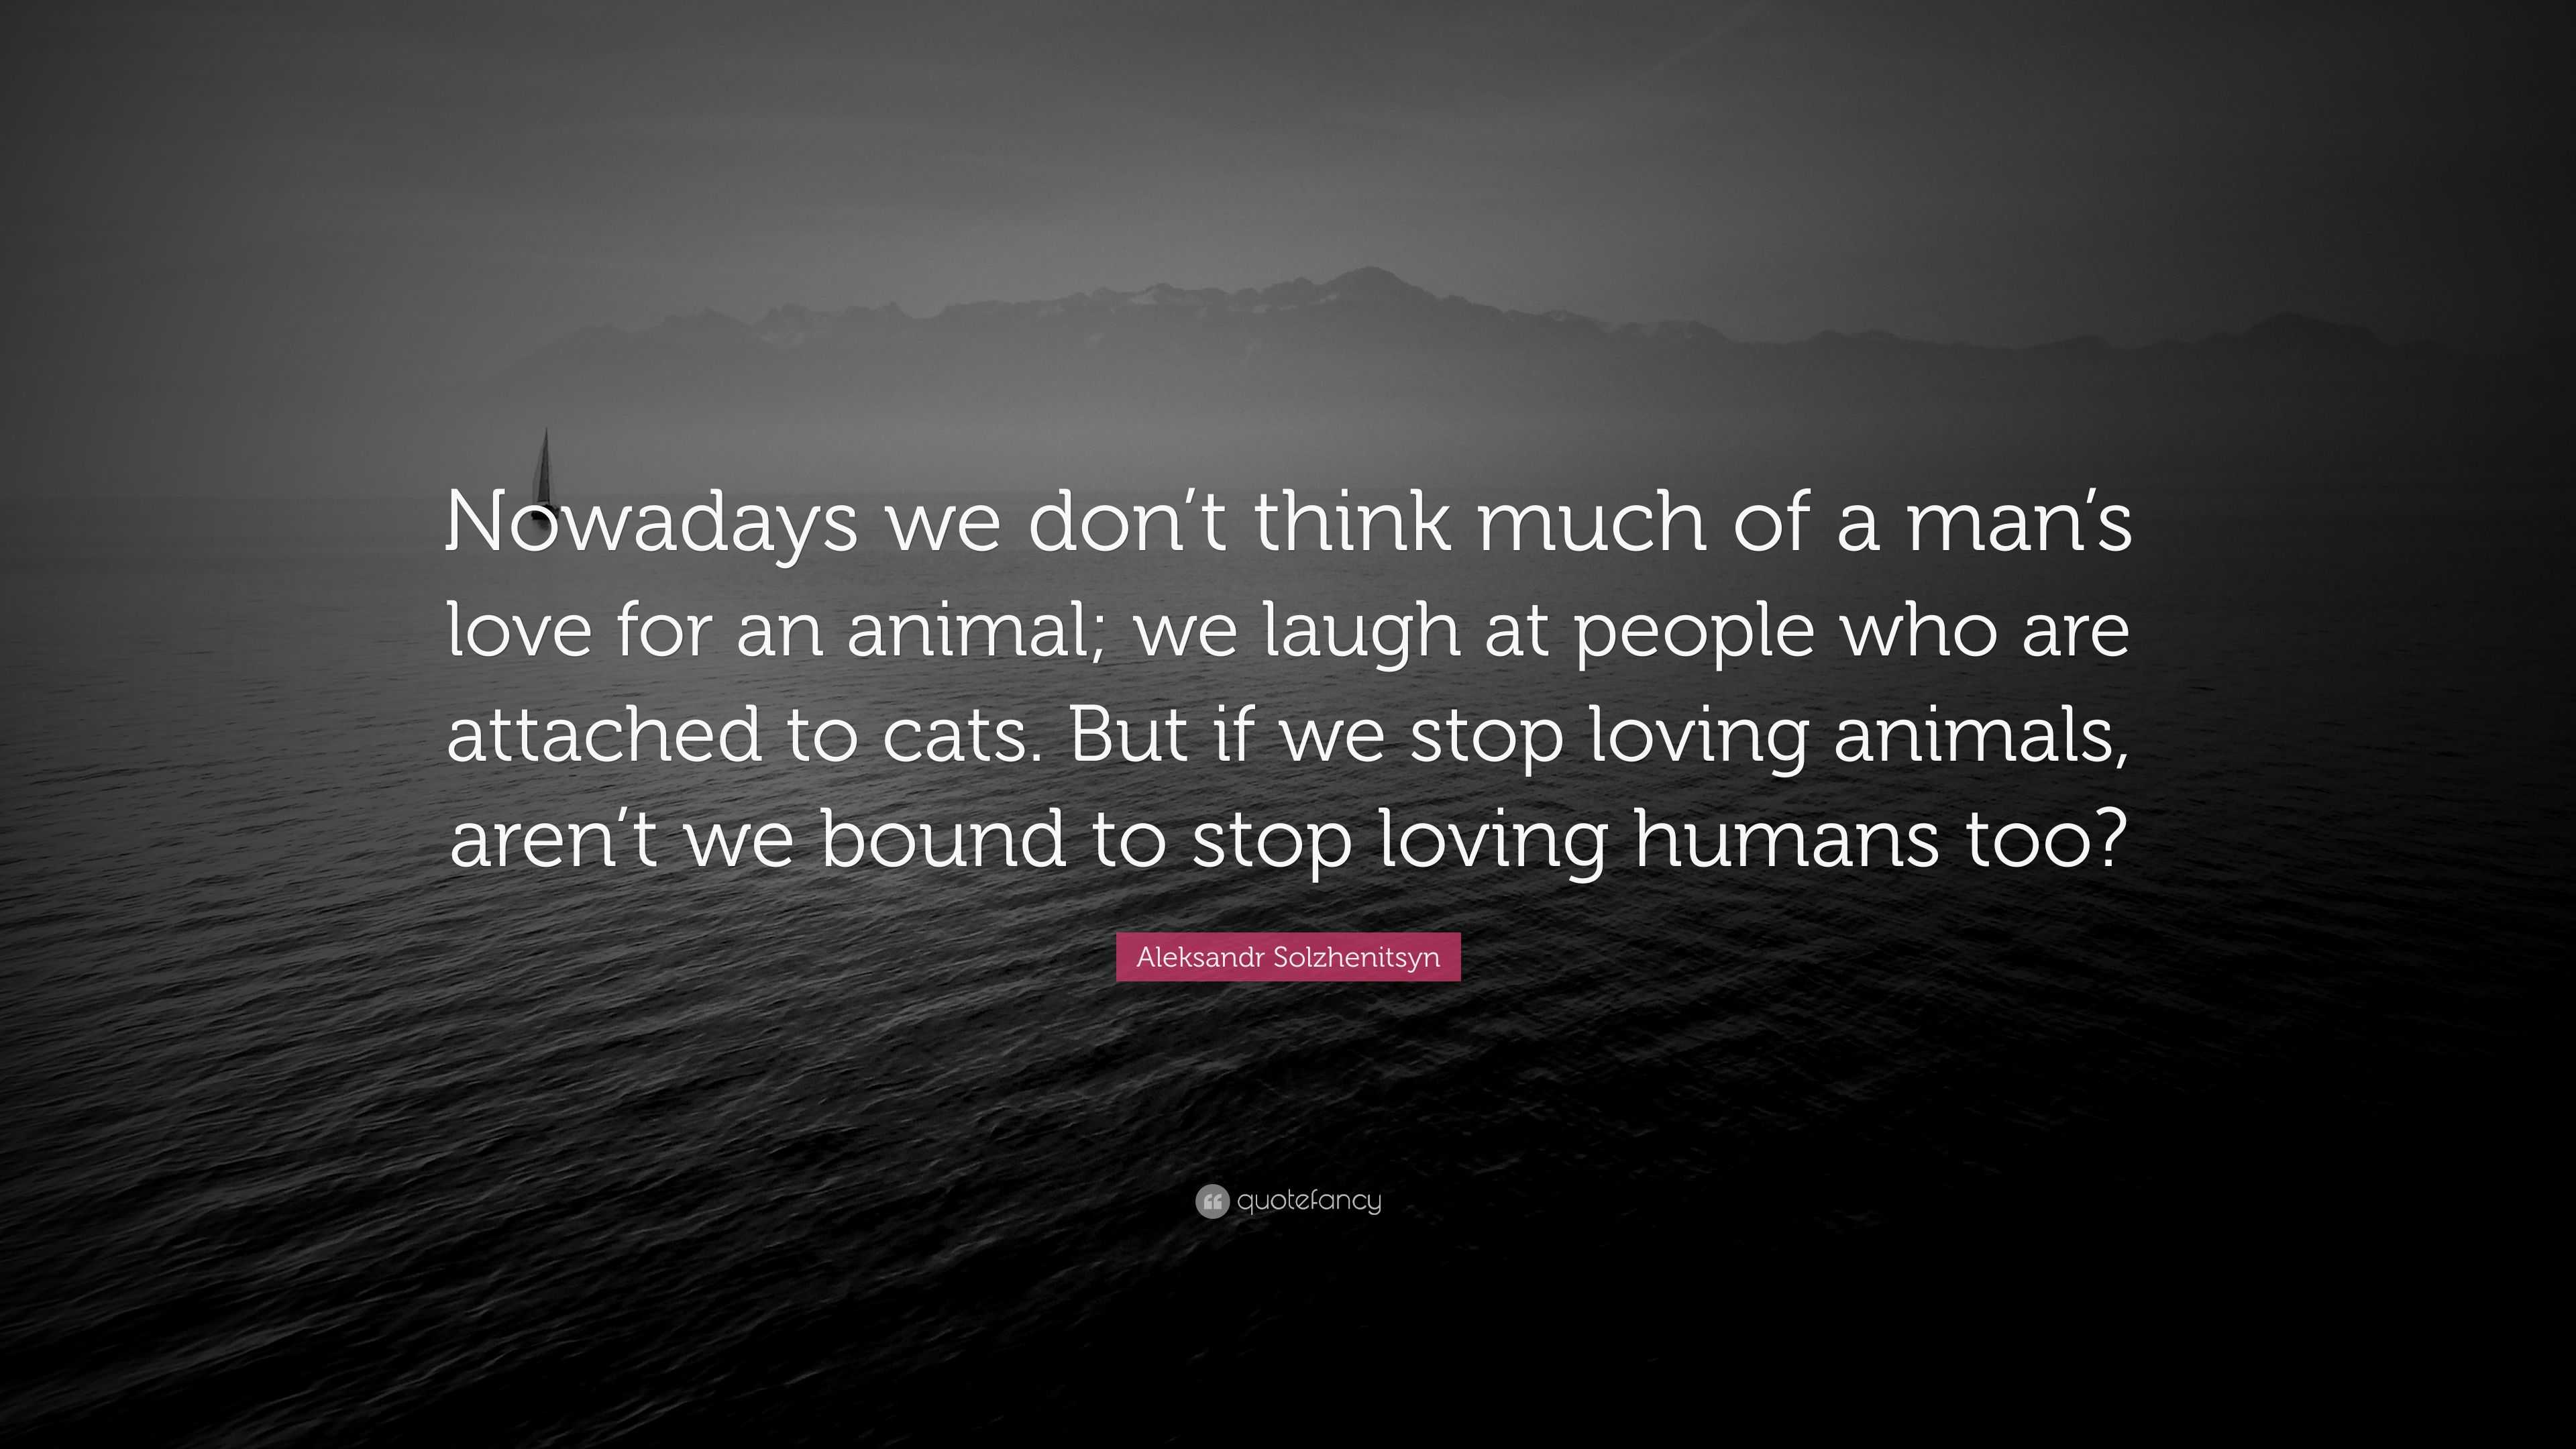 Aleksandr Solzhenitsyn Quote “Nowadays we don t think much of a man s love